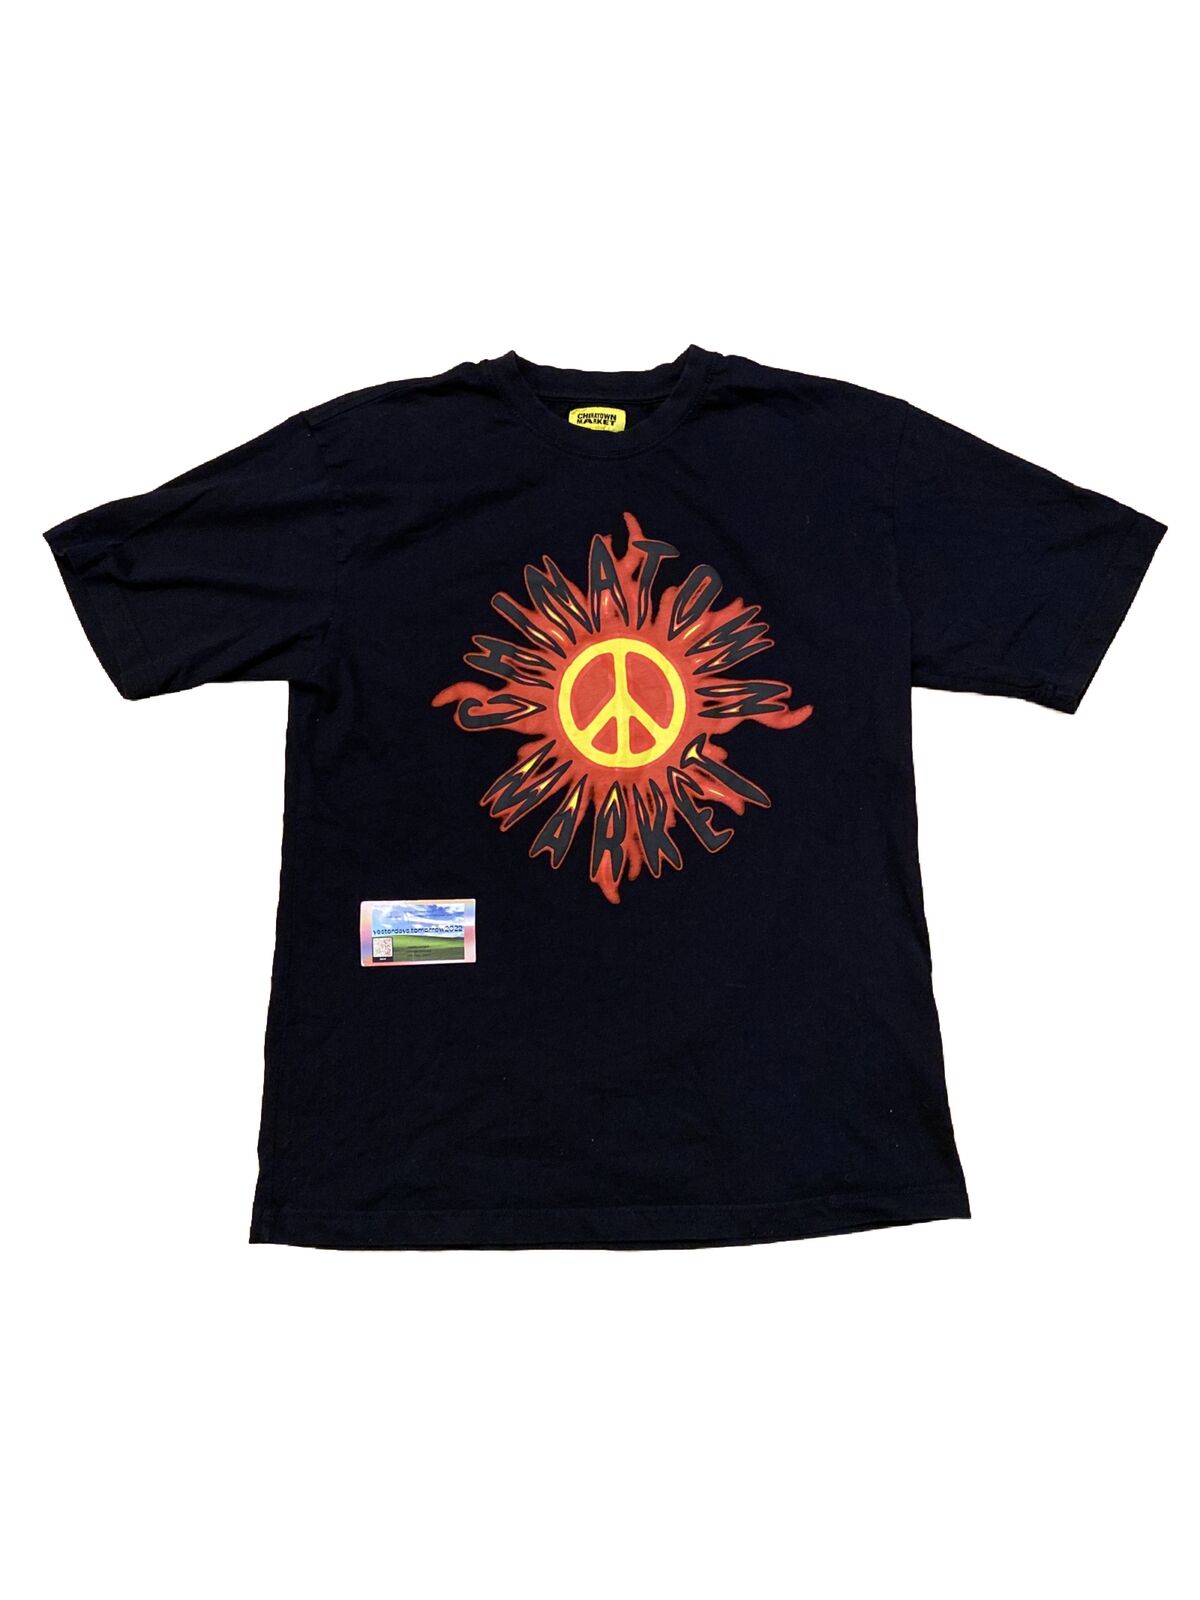 Y2K CHINATOWN MARKET PEACE & LOVE GRAPHIC PRINT T… - image 1